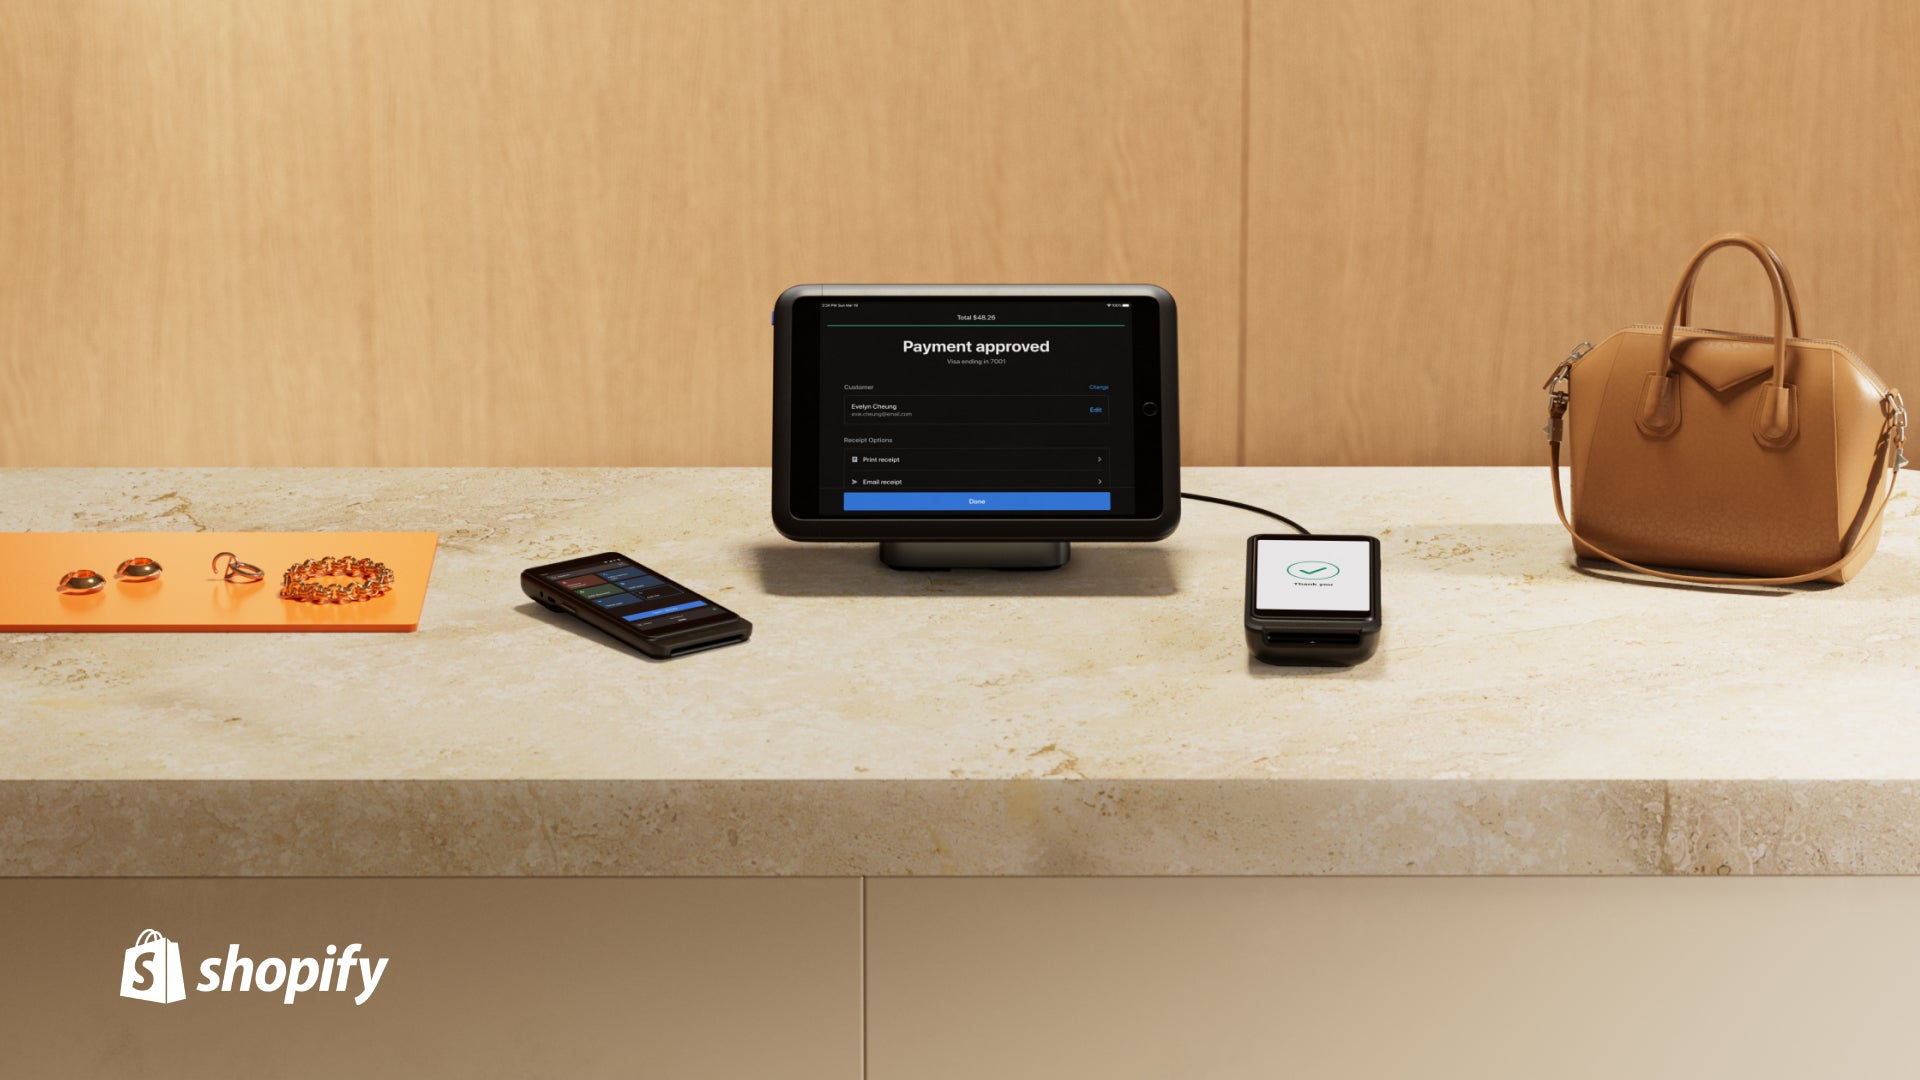 Image of Shopify POS Terminal Countertop Kit on a Store Countertop next to a brown purse on the right side and on the left side a display of jewelry.